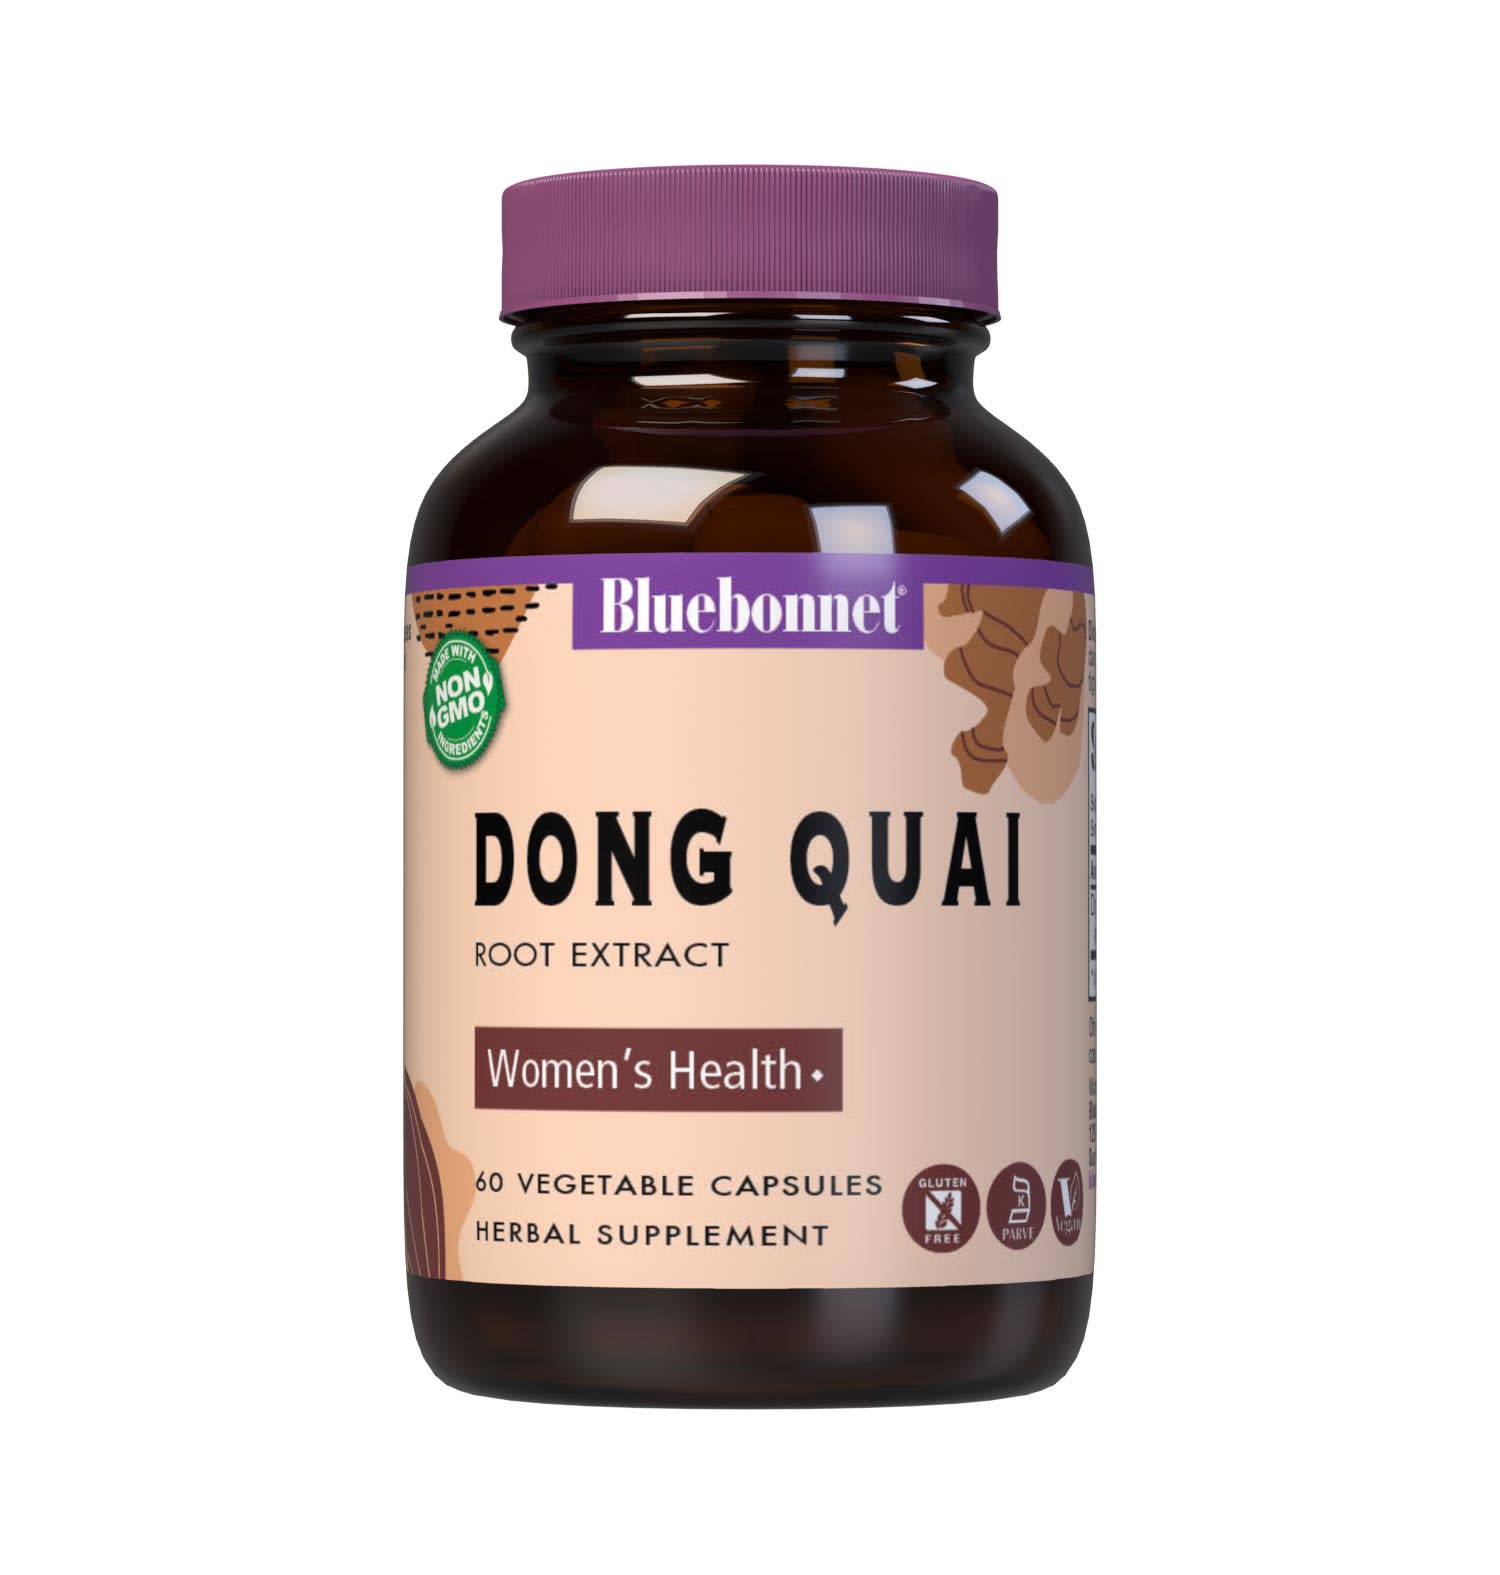 Bluebonnet’s Dong Quai Root Extract 60 Vegetable Capsules contain a full spectrum extract of dong quai root that is carefully produced by a clean and gentle water-based extraction method to capture and preserve dong quai’s most valuable components. #size_60 count